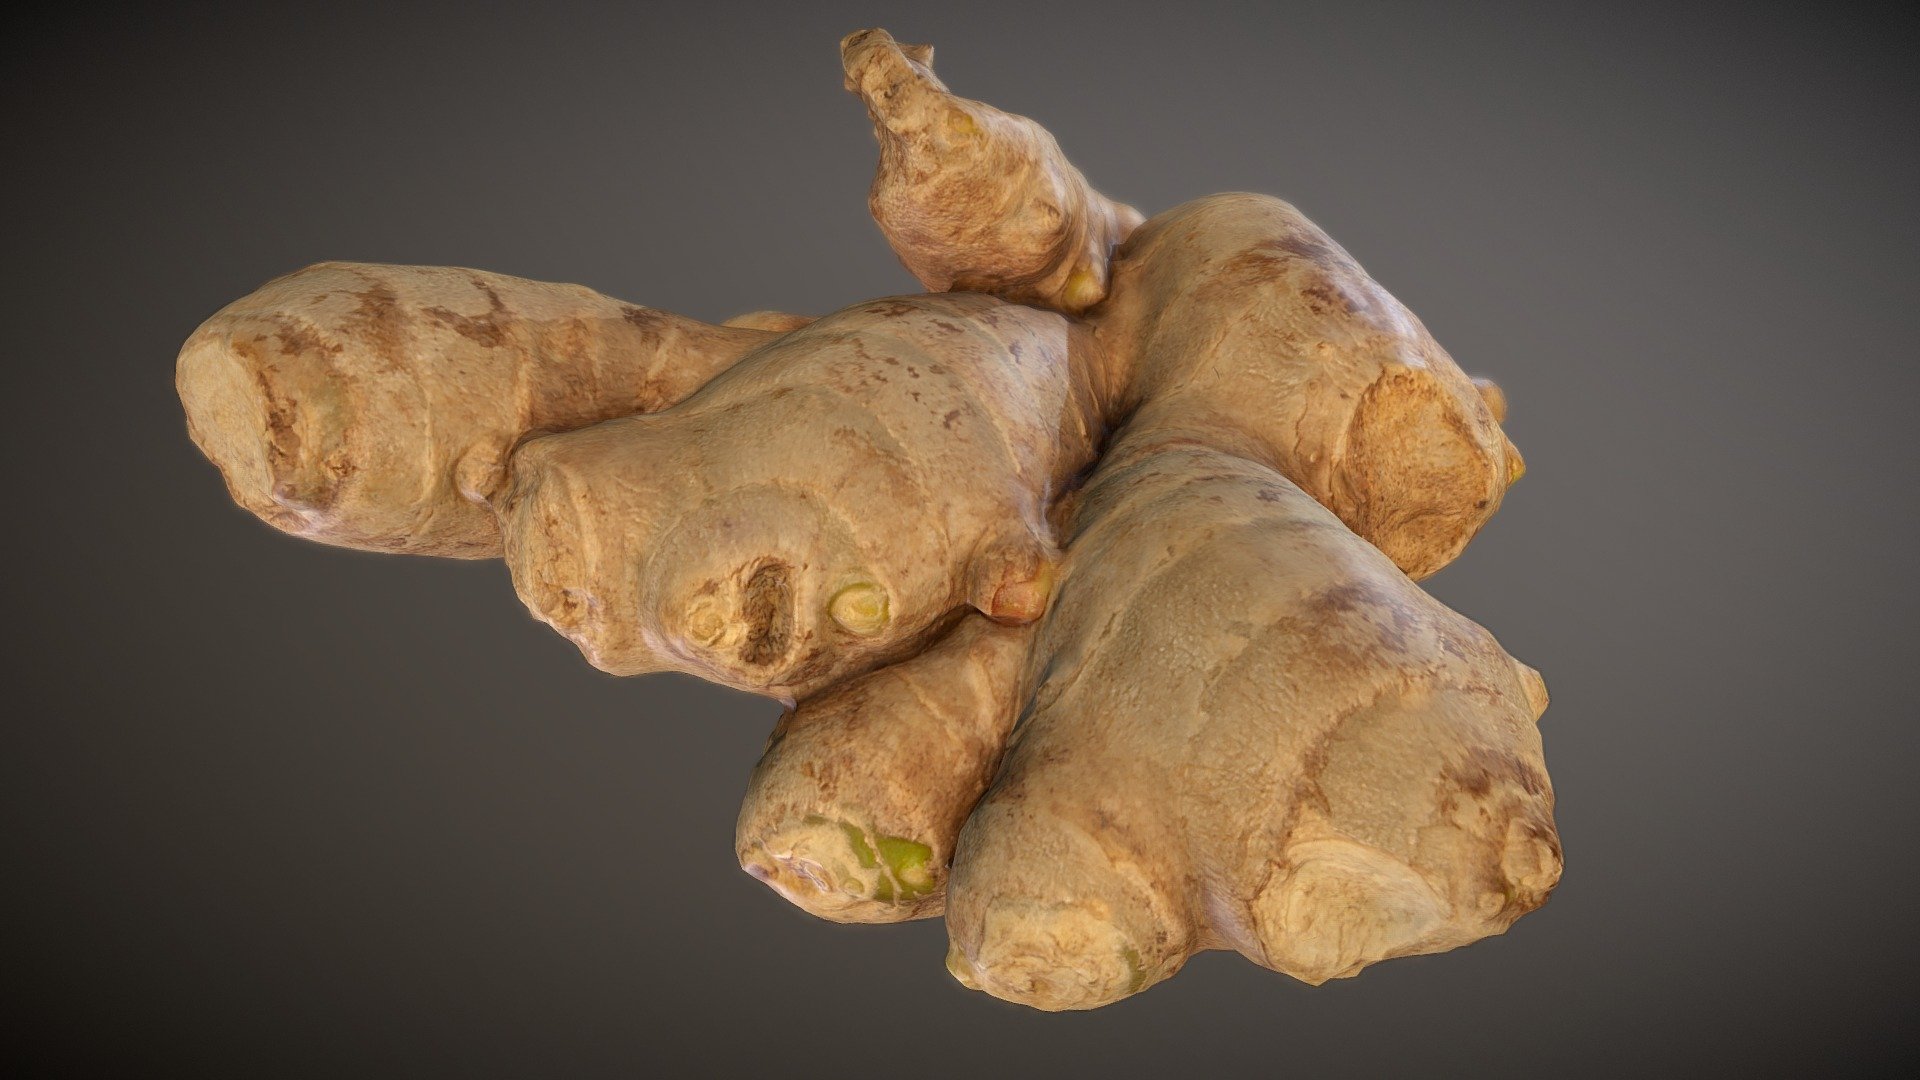 3d Scan Ginger Root Download Free 3d Model By Insomnia333 A592399 Sketchfab